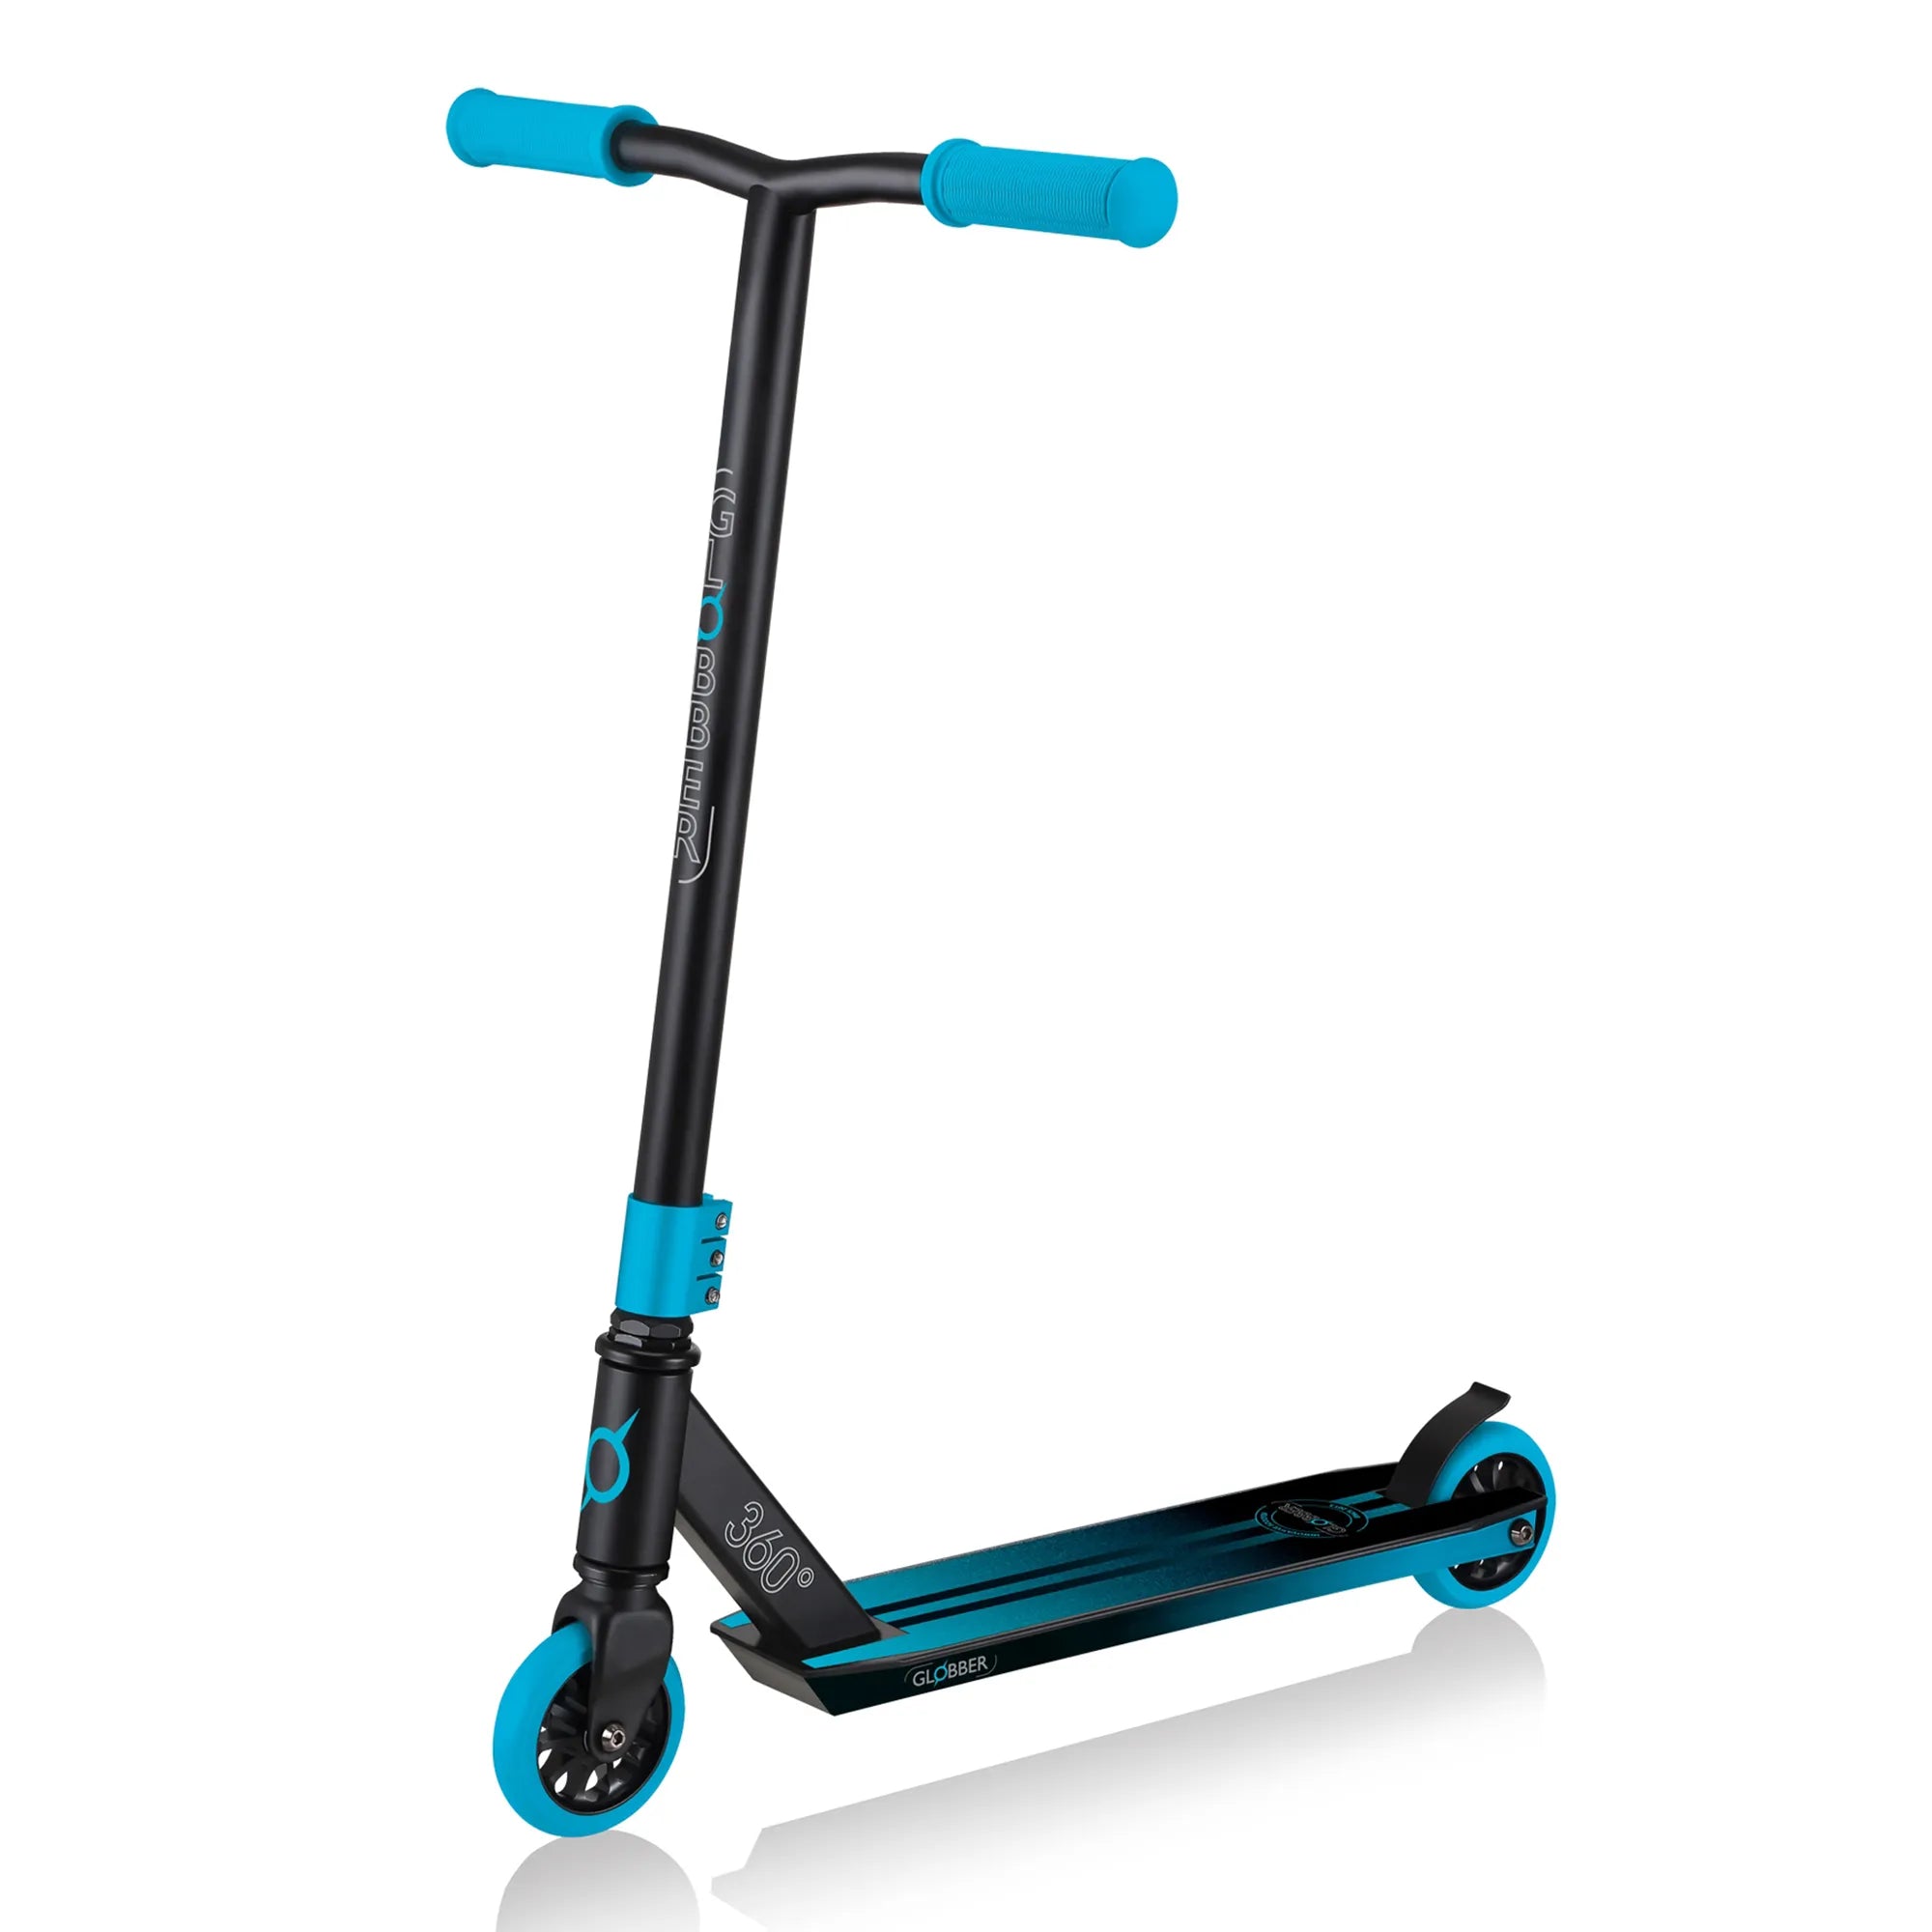 Globber GS 360 - Beginner Stunt Scooter - Black & Blue - Ages 6-Adult - Brown's Hobby & Game